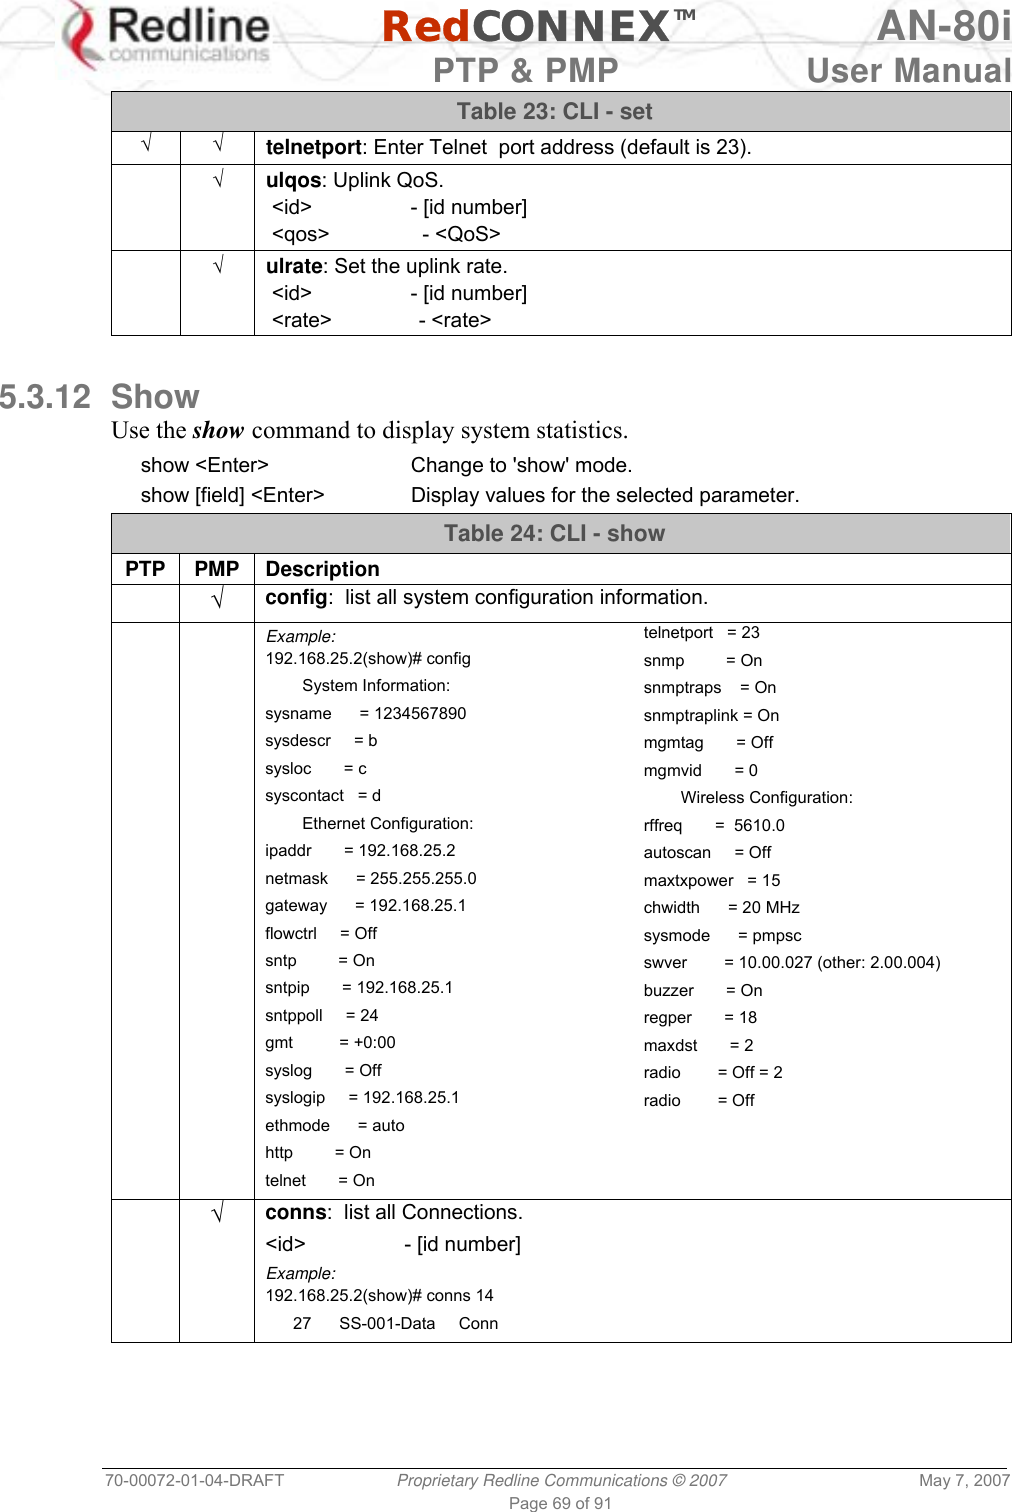   RedCONNEXTM AN-80i   PTP &amp; PMP  User Manual 70-00072-01-04-DRAFT  Proprietary Redline Communications © 2007  May 7, 2007 Page 69 of 91 Table 23: CLI - set √ √ telnetport: Enter Telnet  port address (default is 23).   √ ulqos: Uplink QoS.  &lt;id&gt;                 - [id number]  &lt;qos&gt;                - &lt;QoS&gt;  √ ulrate: Set the uplink rate.  &lt;id&gt;                 - [id number]  &lt;rate&gt;               - &lt;rate&gt;  5.3.12 Show Use the show command to display system statistics. show &lt;Enter&gt;  Change to &apos;show&apos; mode. show [field] &lt;Enter&gt;  Display values for the selected parameter. Table 24: CLI - show PTP PMP Description  √ config:  list all system configuration information.   Example: 192.168.25.2(show)# config         System Information: sysname      = 1234567890 sysdescr     = b sysloc       = c syscontact   = d         Ethernet Configuration: ipaddr       = 192.168.25.2 netmask      = 255.255.255.0 gateway      = 192.168.25.1 flowctrl     = Off sntp         = On sntpip       = 192.168.25.1 sntppoll     = 24 gmt          = +0:00 syslog       = Off syslogip     = 192.168.25.1 ethmode      = auto http         = On telnet       = On telnetport   = 23 snmp         = On snmptraps    = On snmptraplink = On mgmtag       = Off mgmvid       = 0         Wireless Configuration: rffreq       =  5610.0 autoscan     = Off maxtxpower   = 15 chwidth      = 20 MHz sysmode      = pmpsc swver        = 10.00.027 (other: 2.00.004) buzzer       = On regper       = 18 maxdst       = 2 radio        = Off = 2 radio        = Off  √ conns:  list all Connections. &lt;id&gt;                 - [id number] Example: 192.168.25.2(show)# conns 14       27      SS-001-Data     Conn 